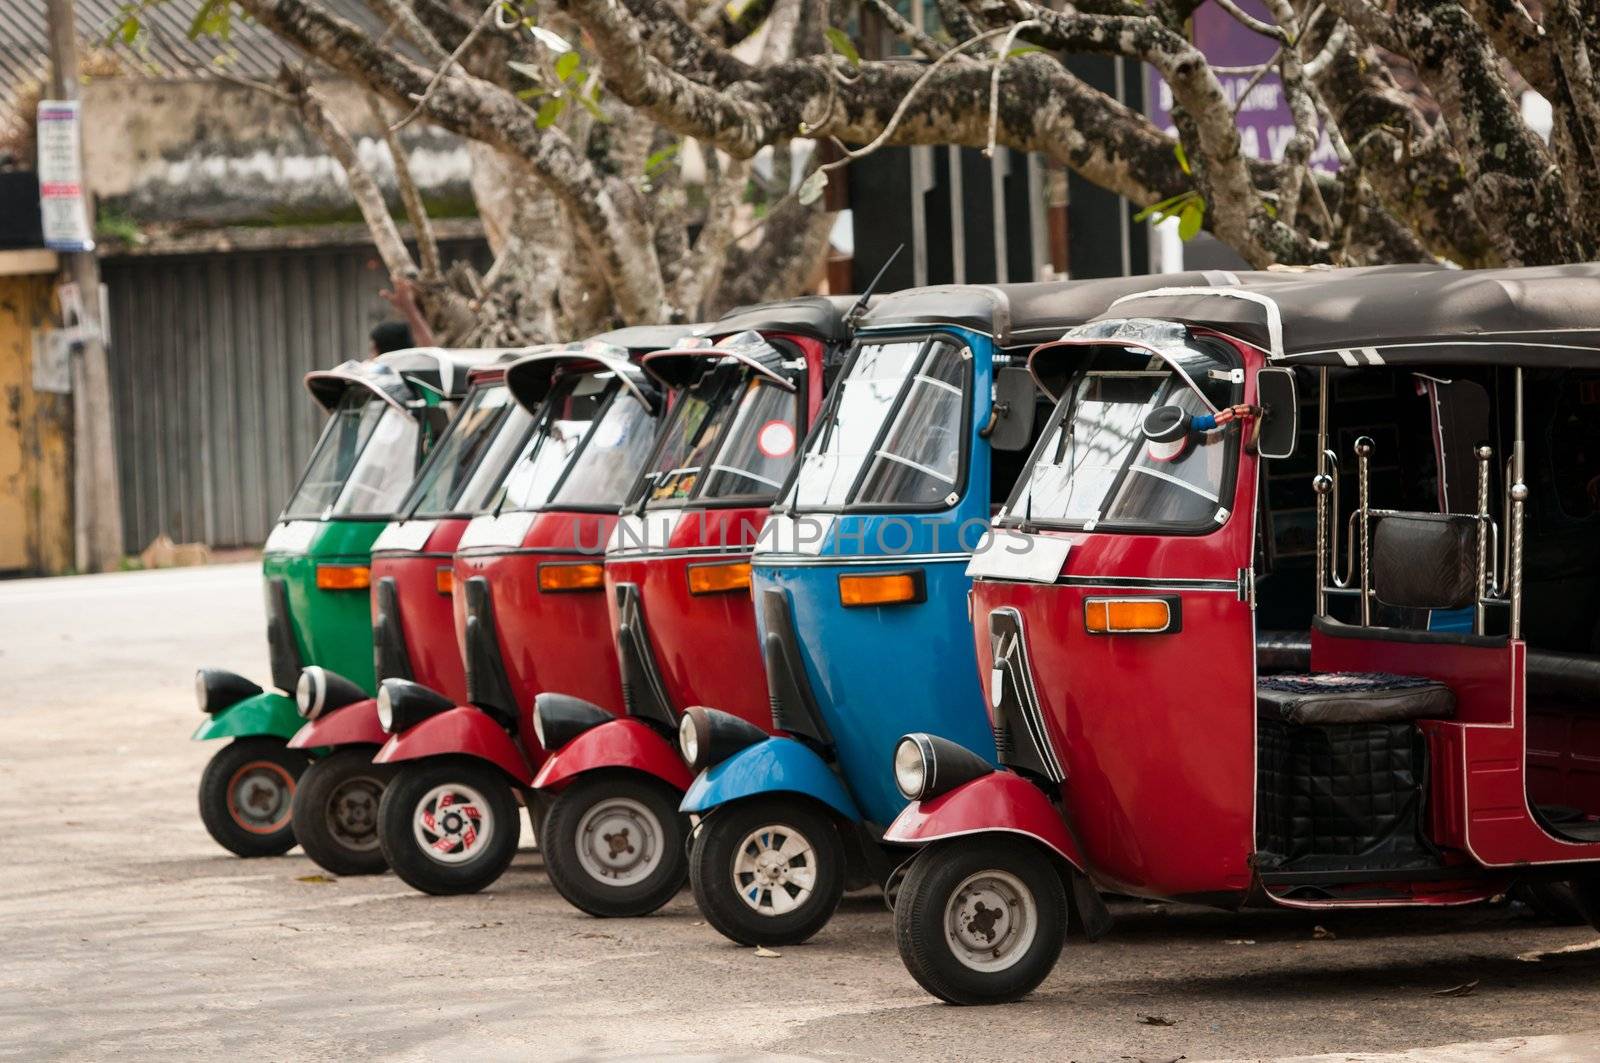 Tuk-tuk is the most popular transport type on Asian streets.